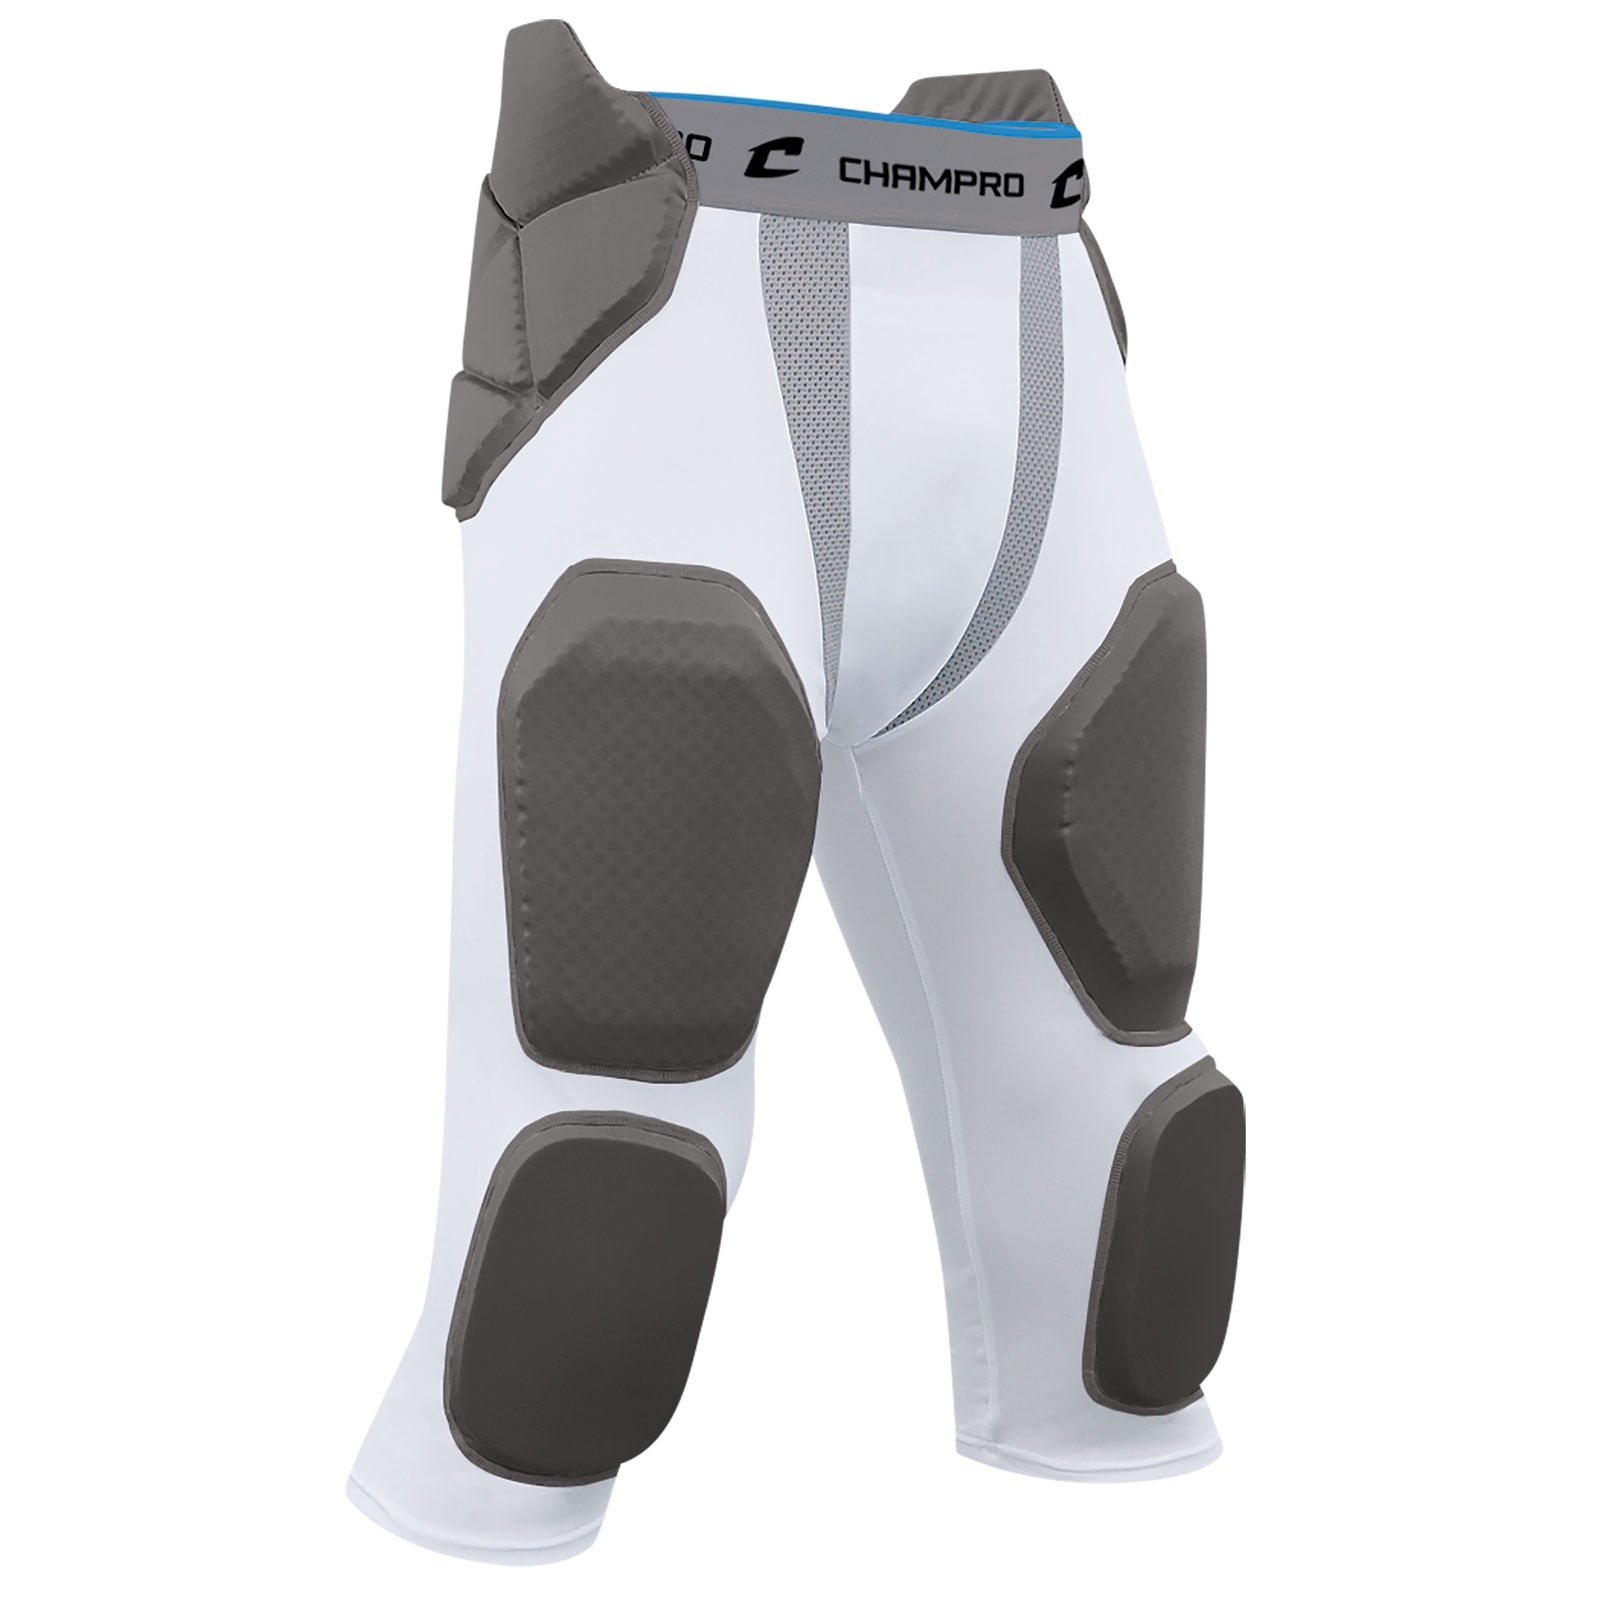 NEW Champro Bull Rush Youth 5-Piece Football Girdle Lists @ $40 White 